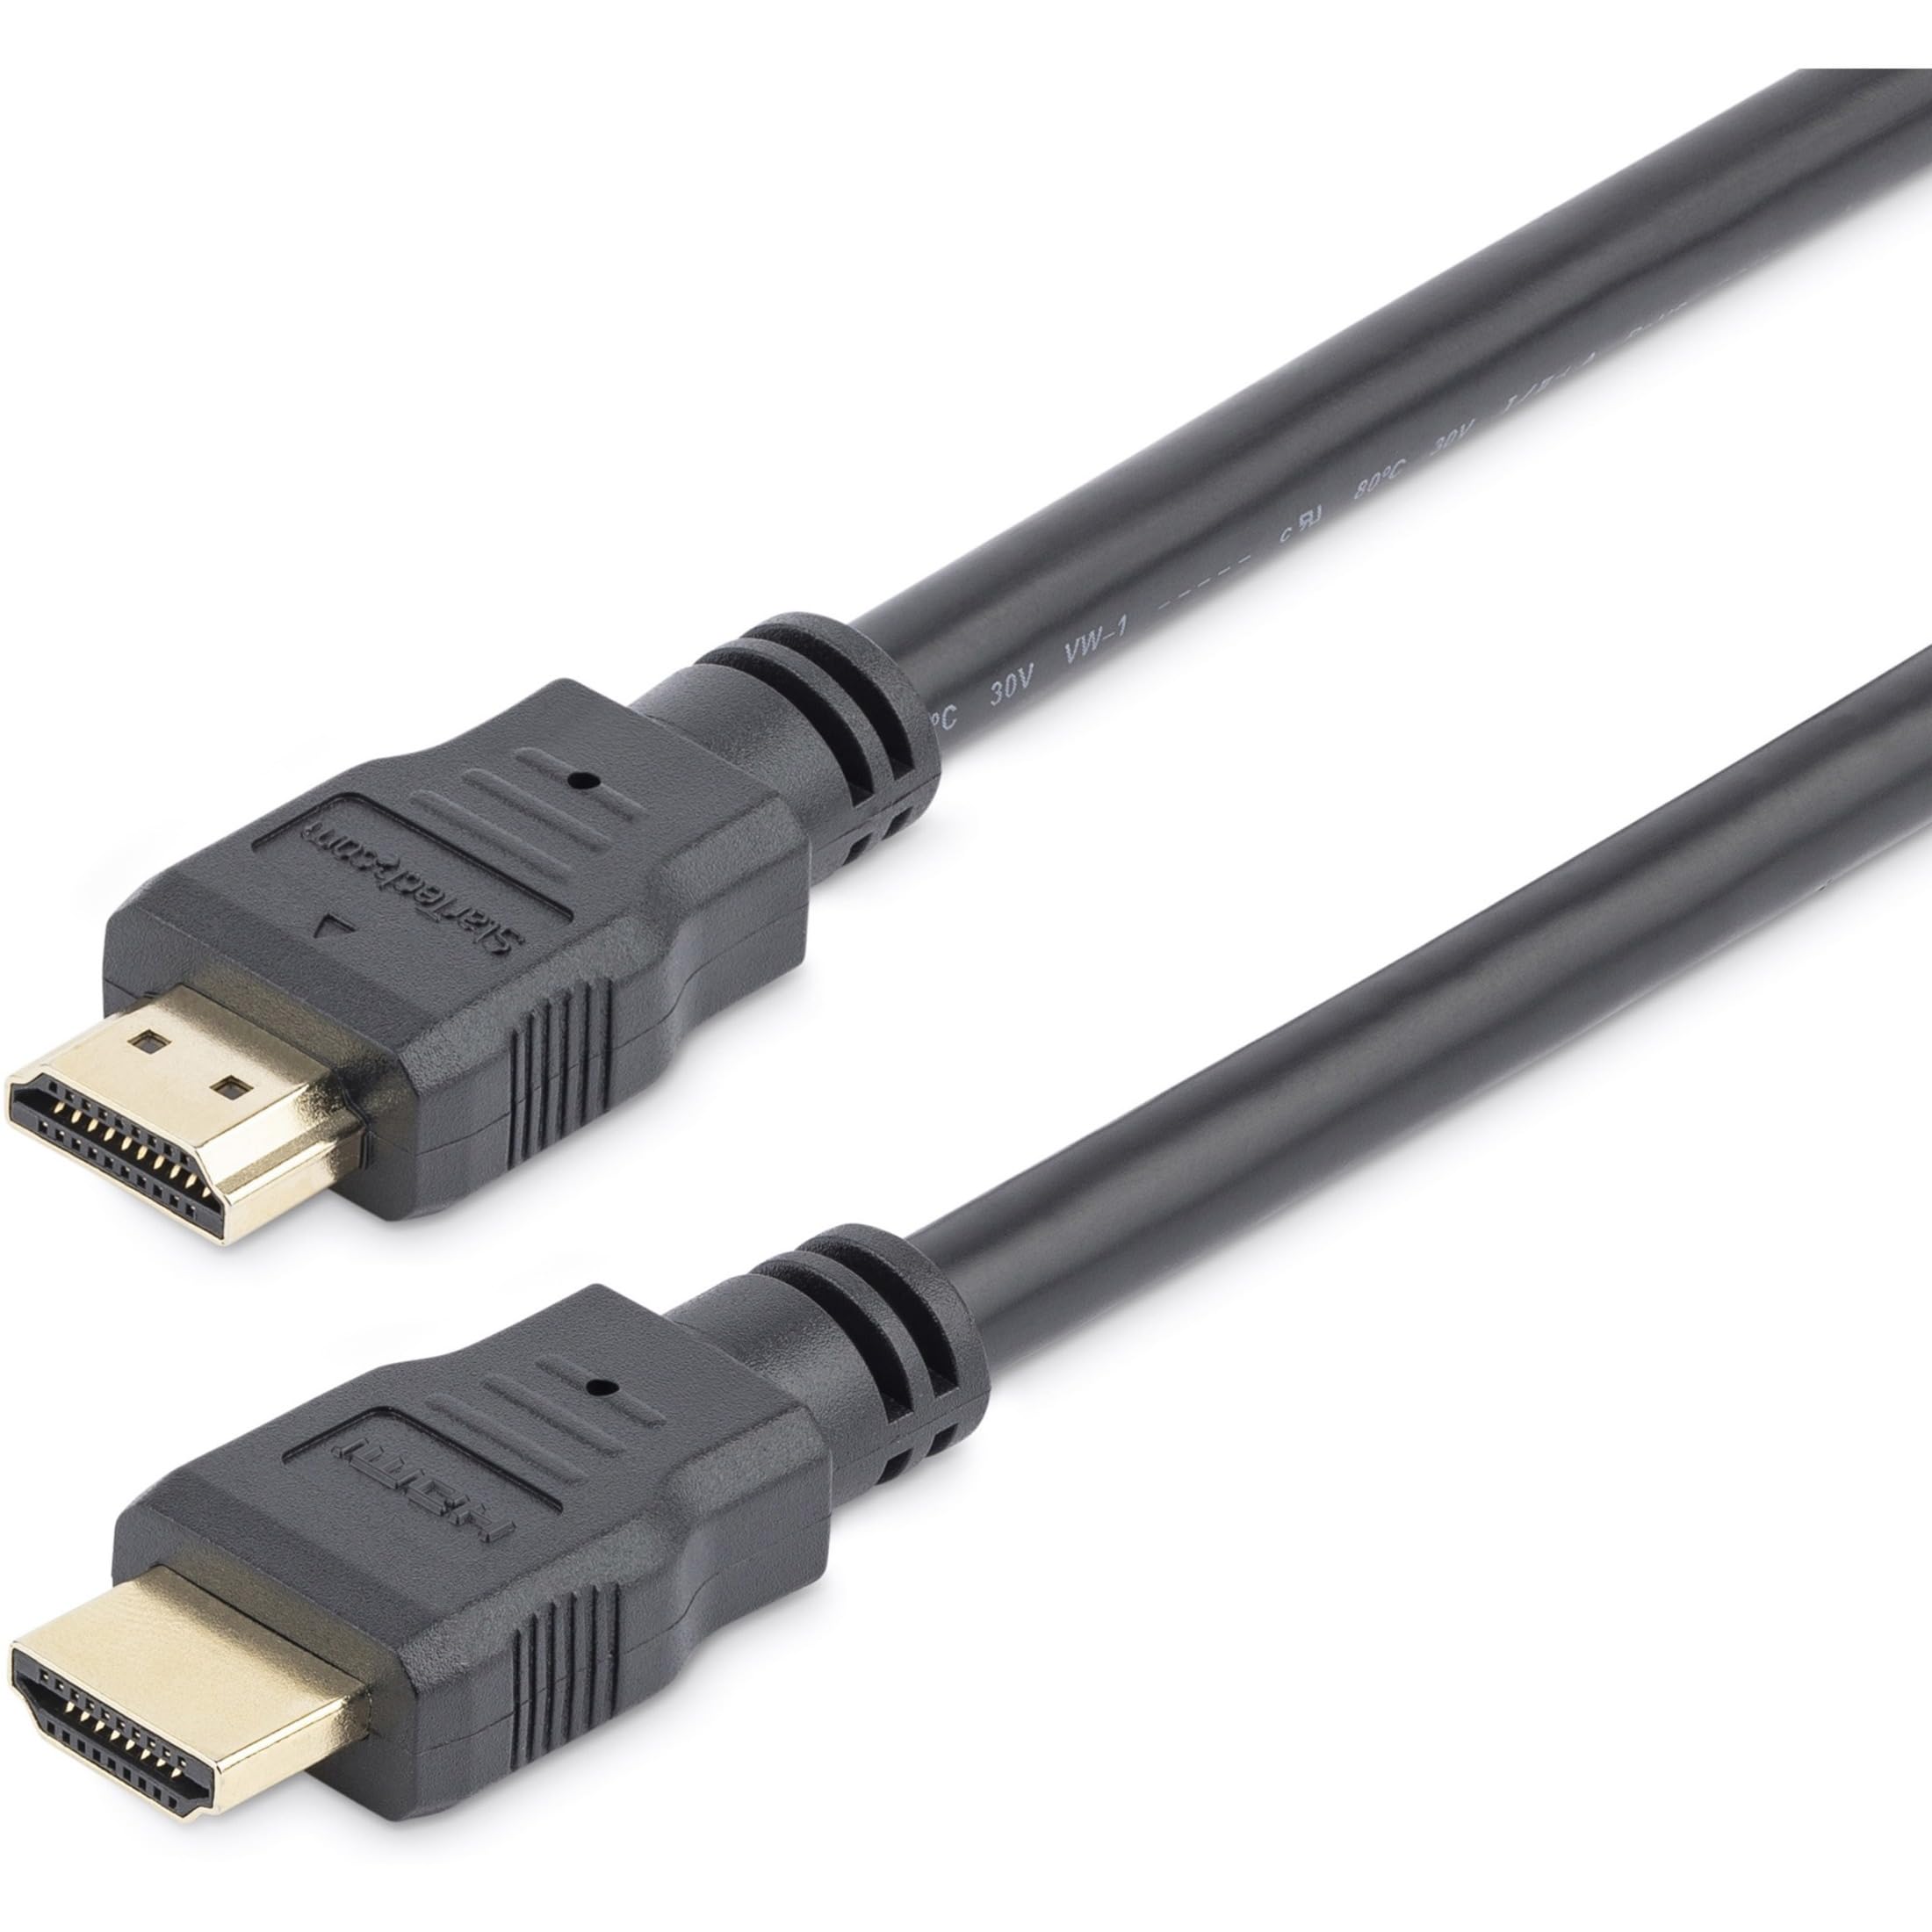 Properly connected HDMI cable